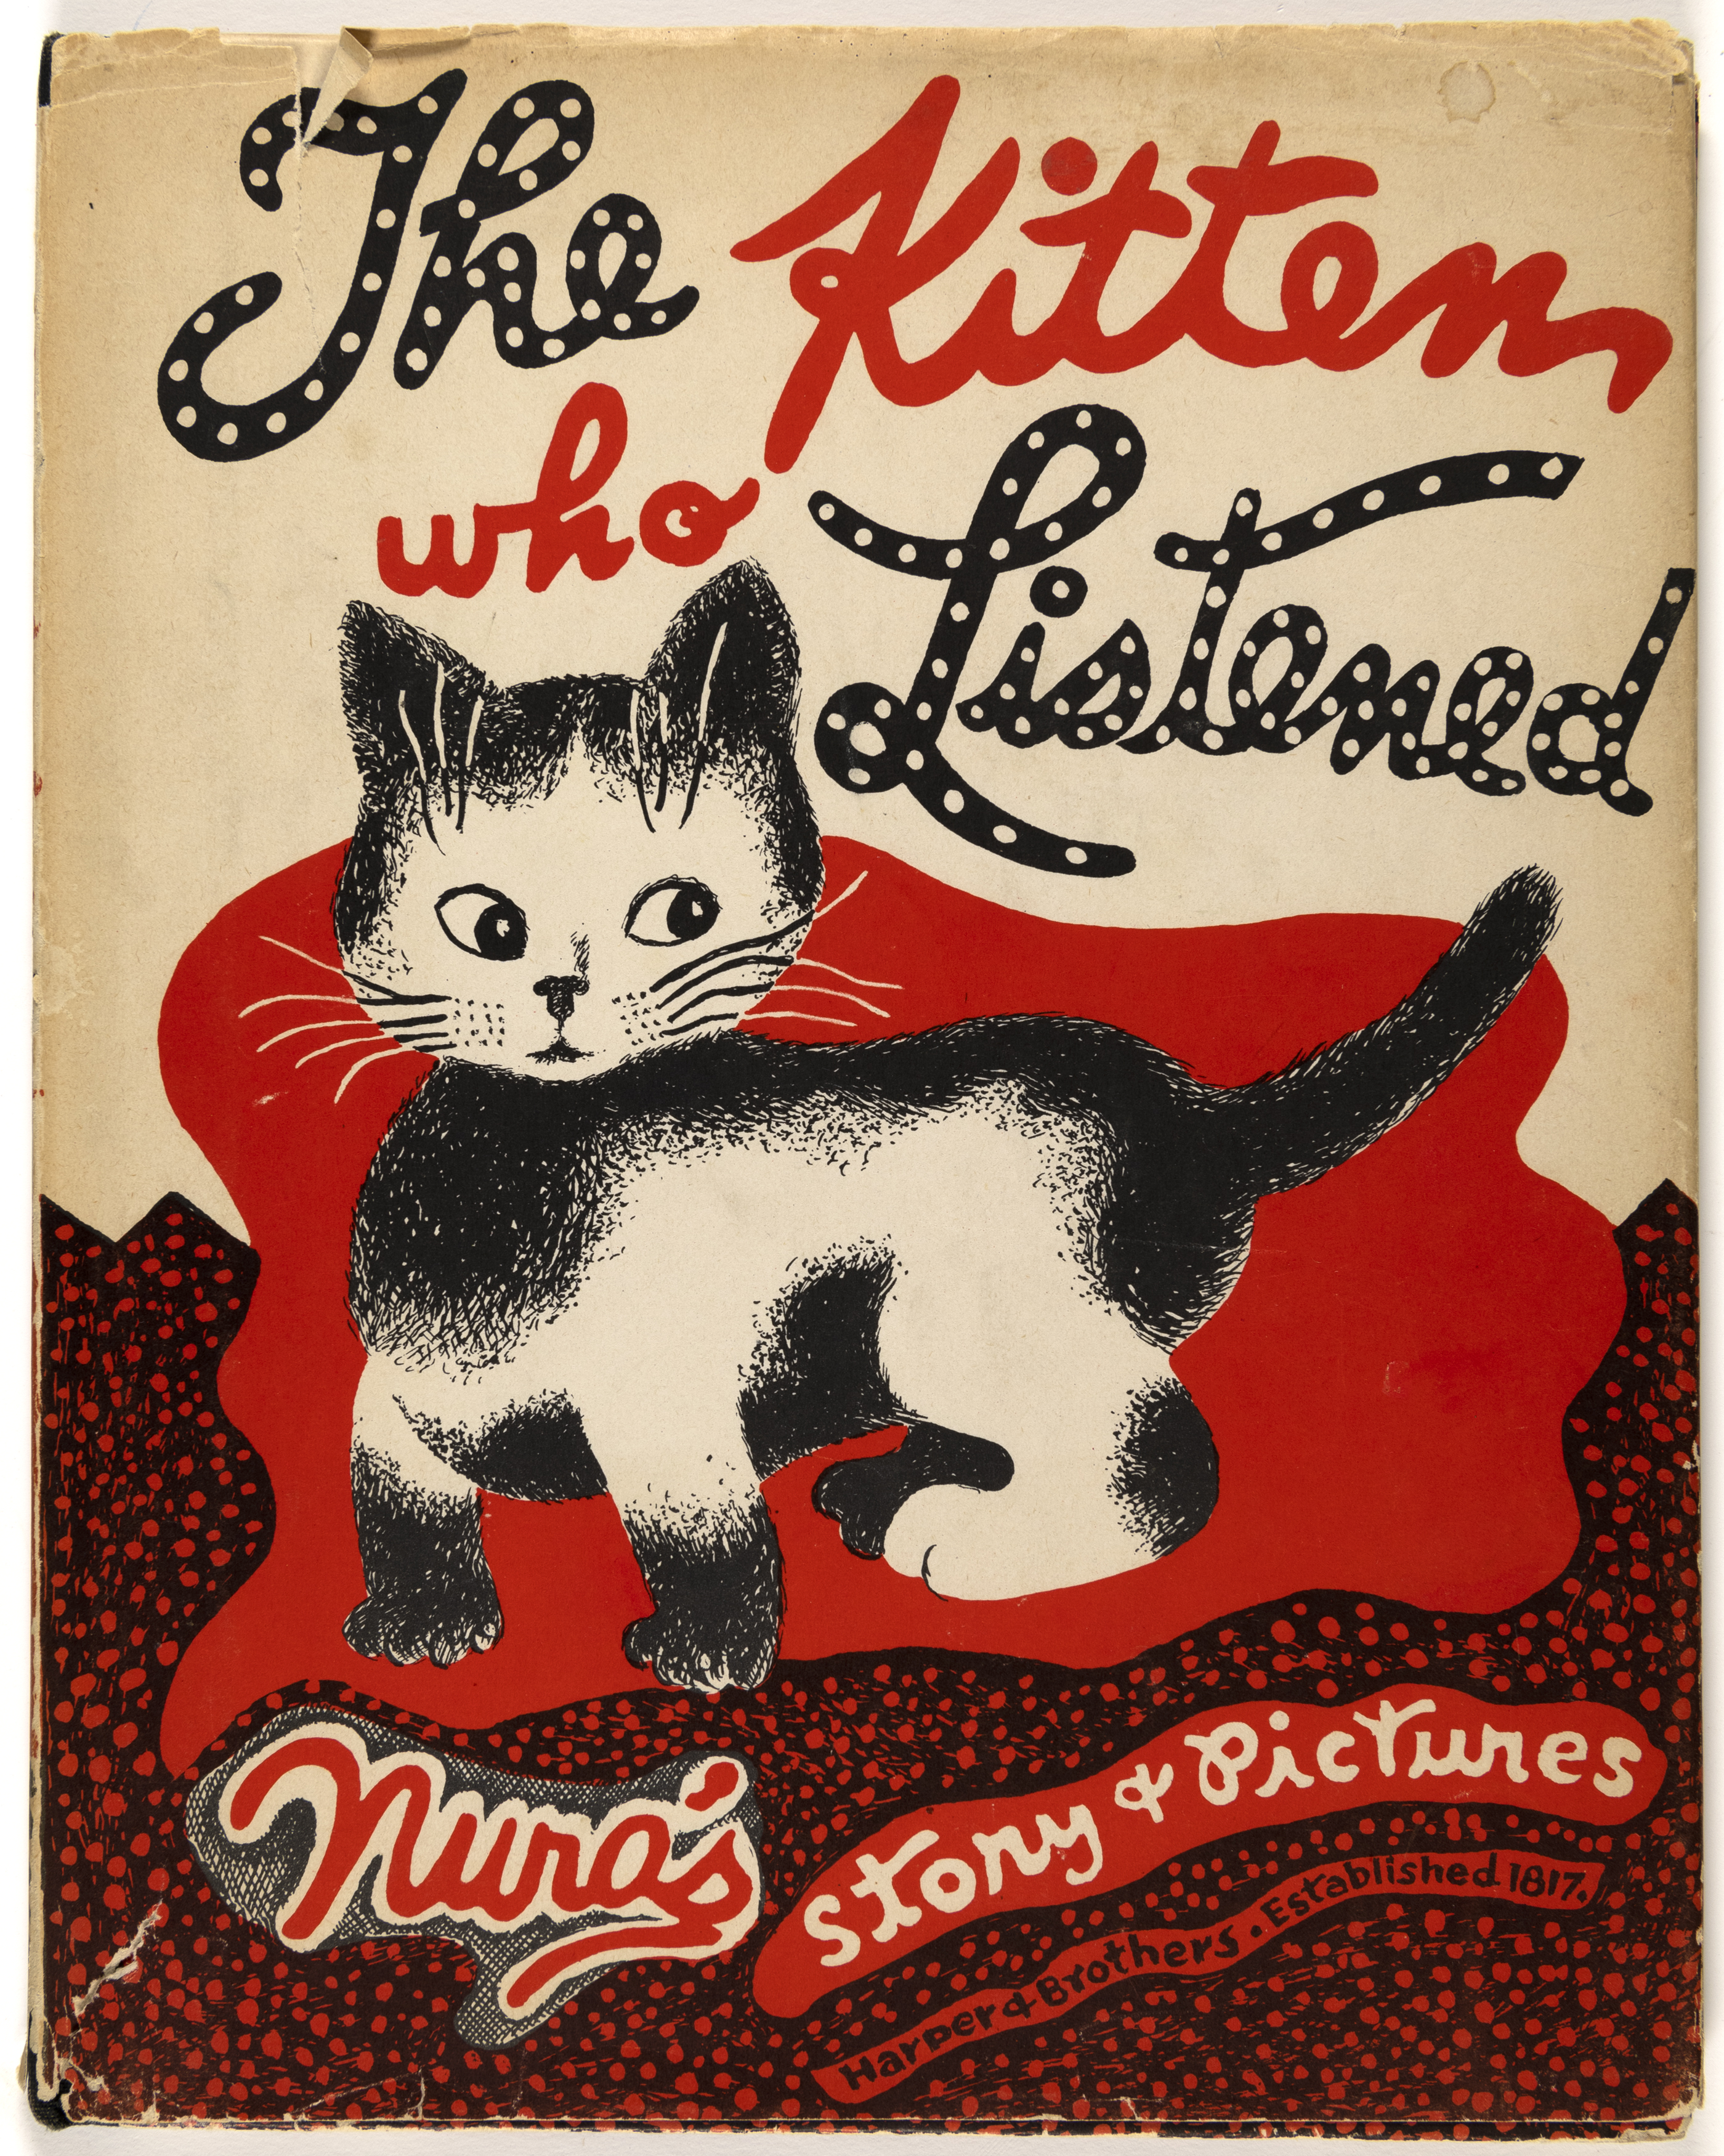 Book cover showing kitten with abstract shapes. 